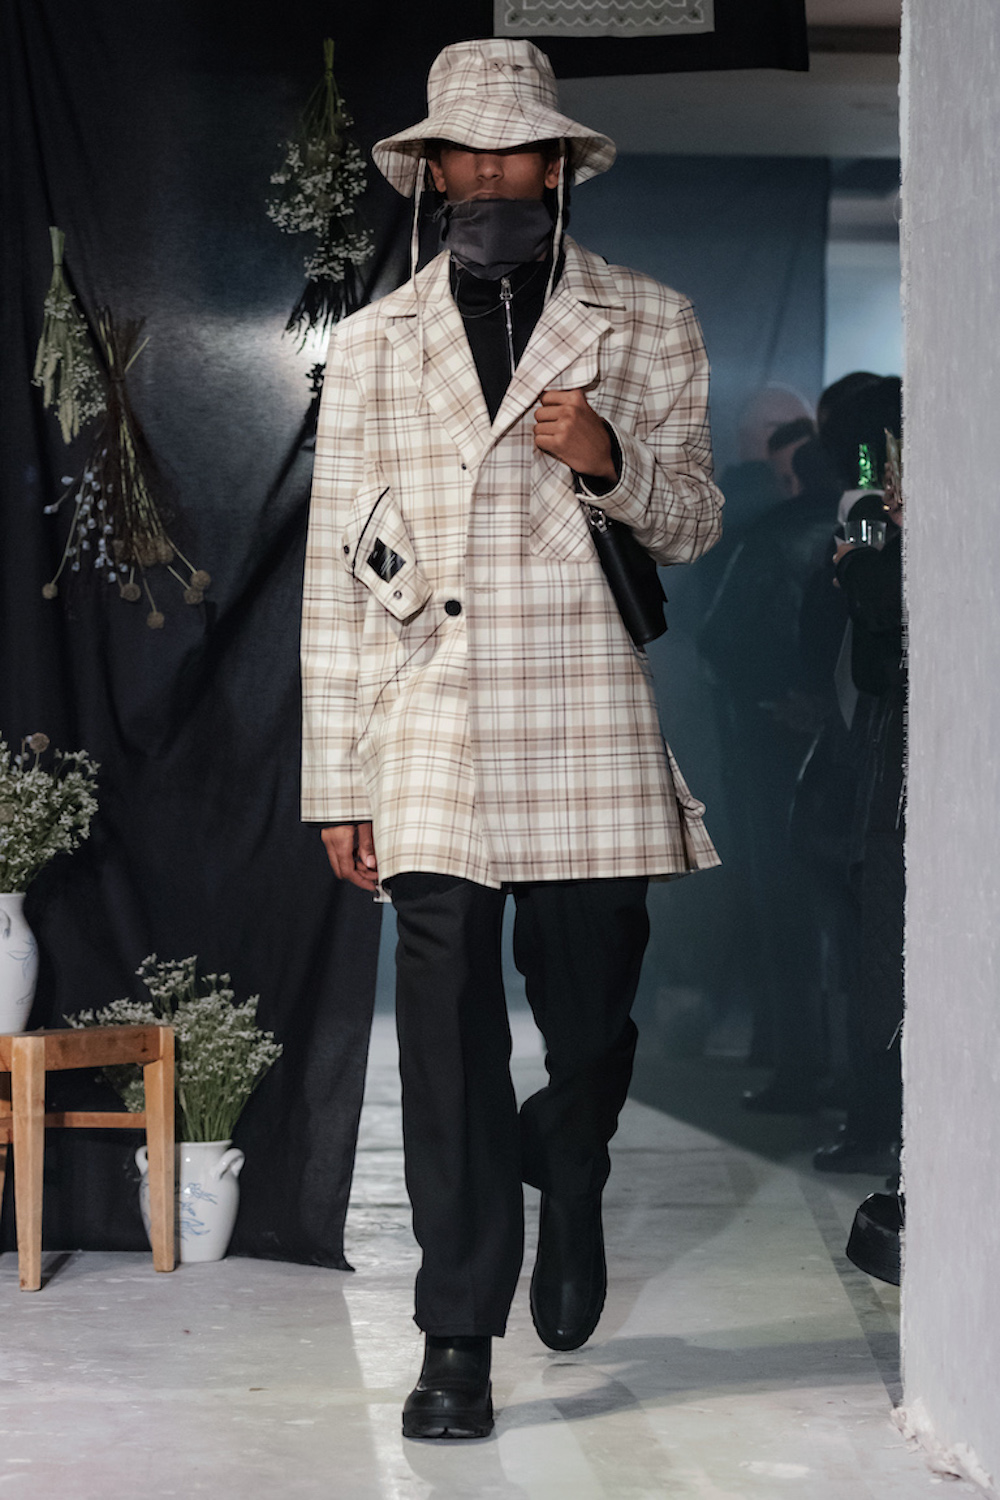 Stockholm Fashion Week: L’HOMME ROUGE Autumn/Winter 2019 Collection